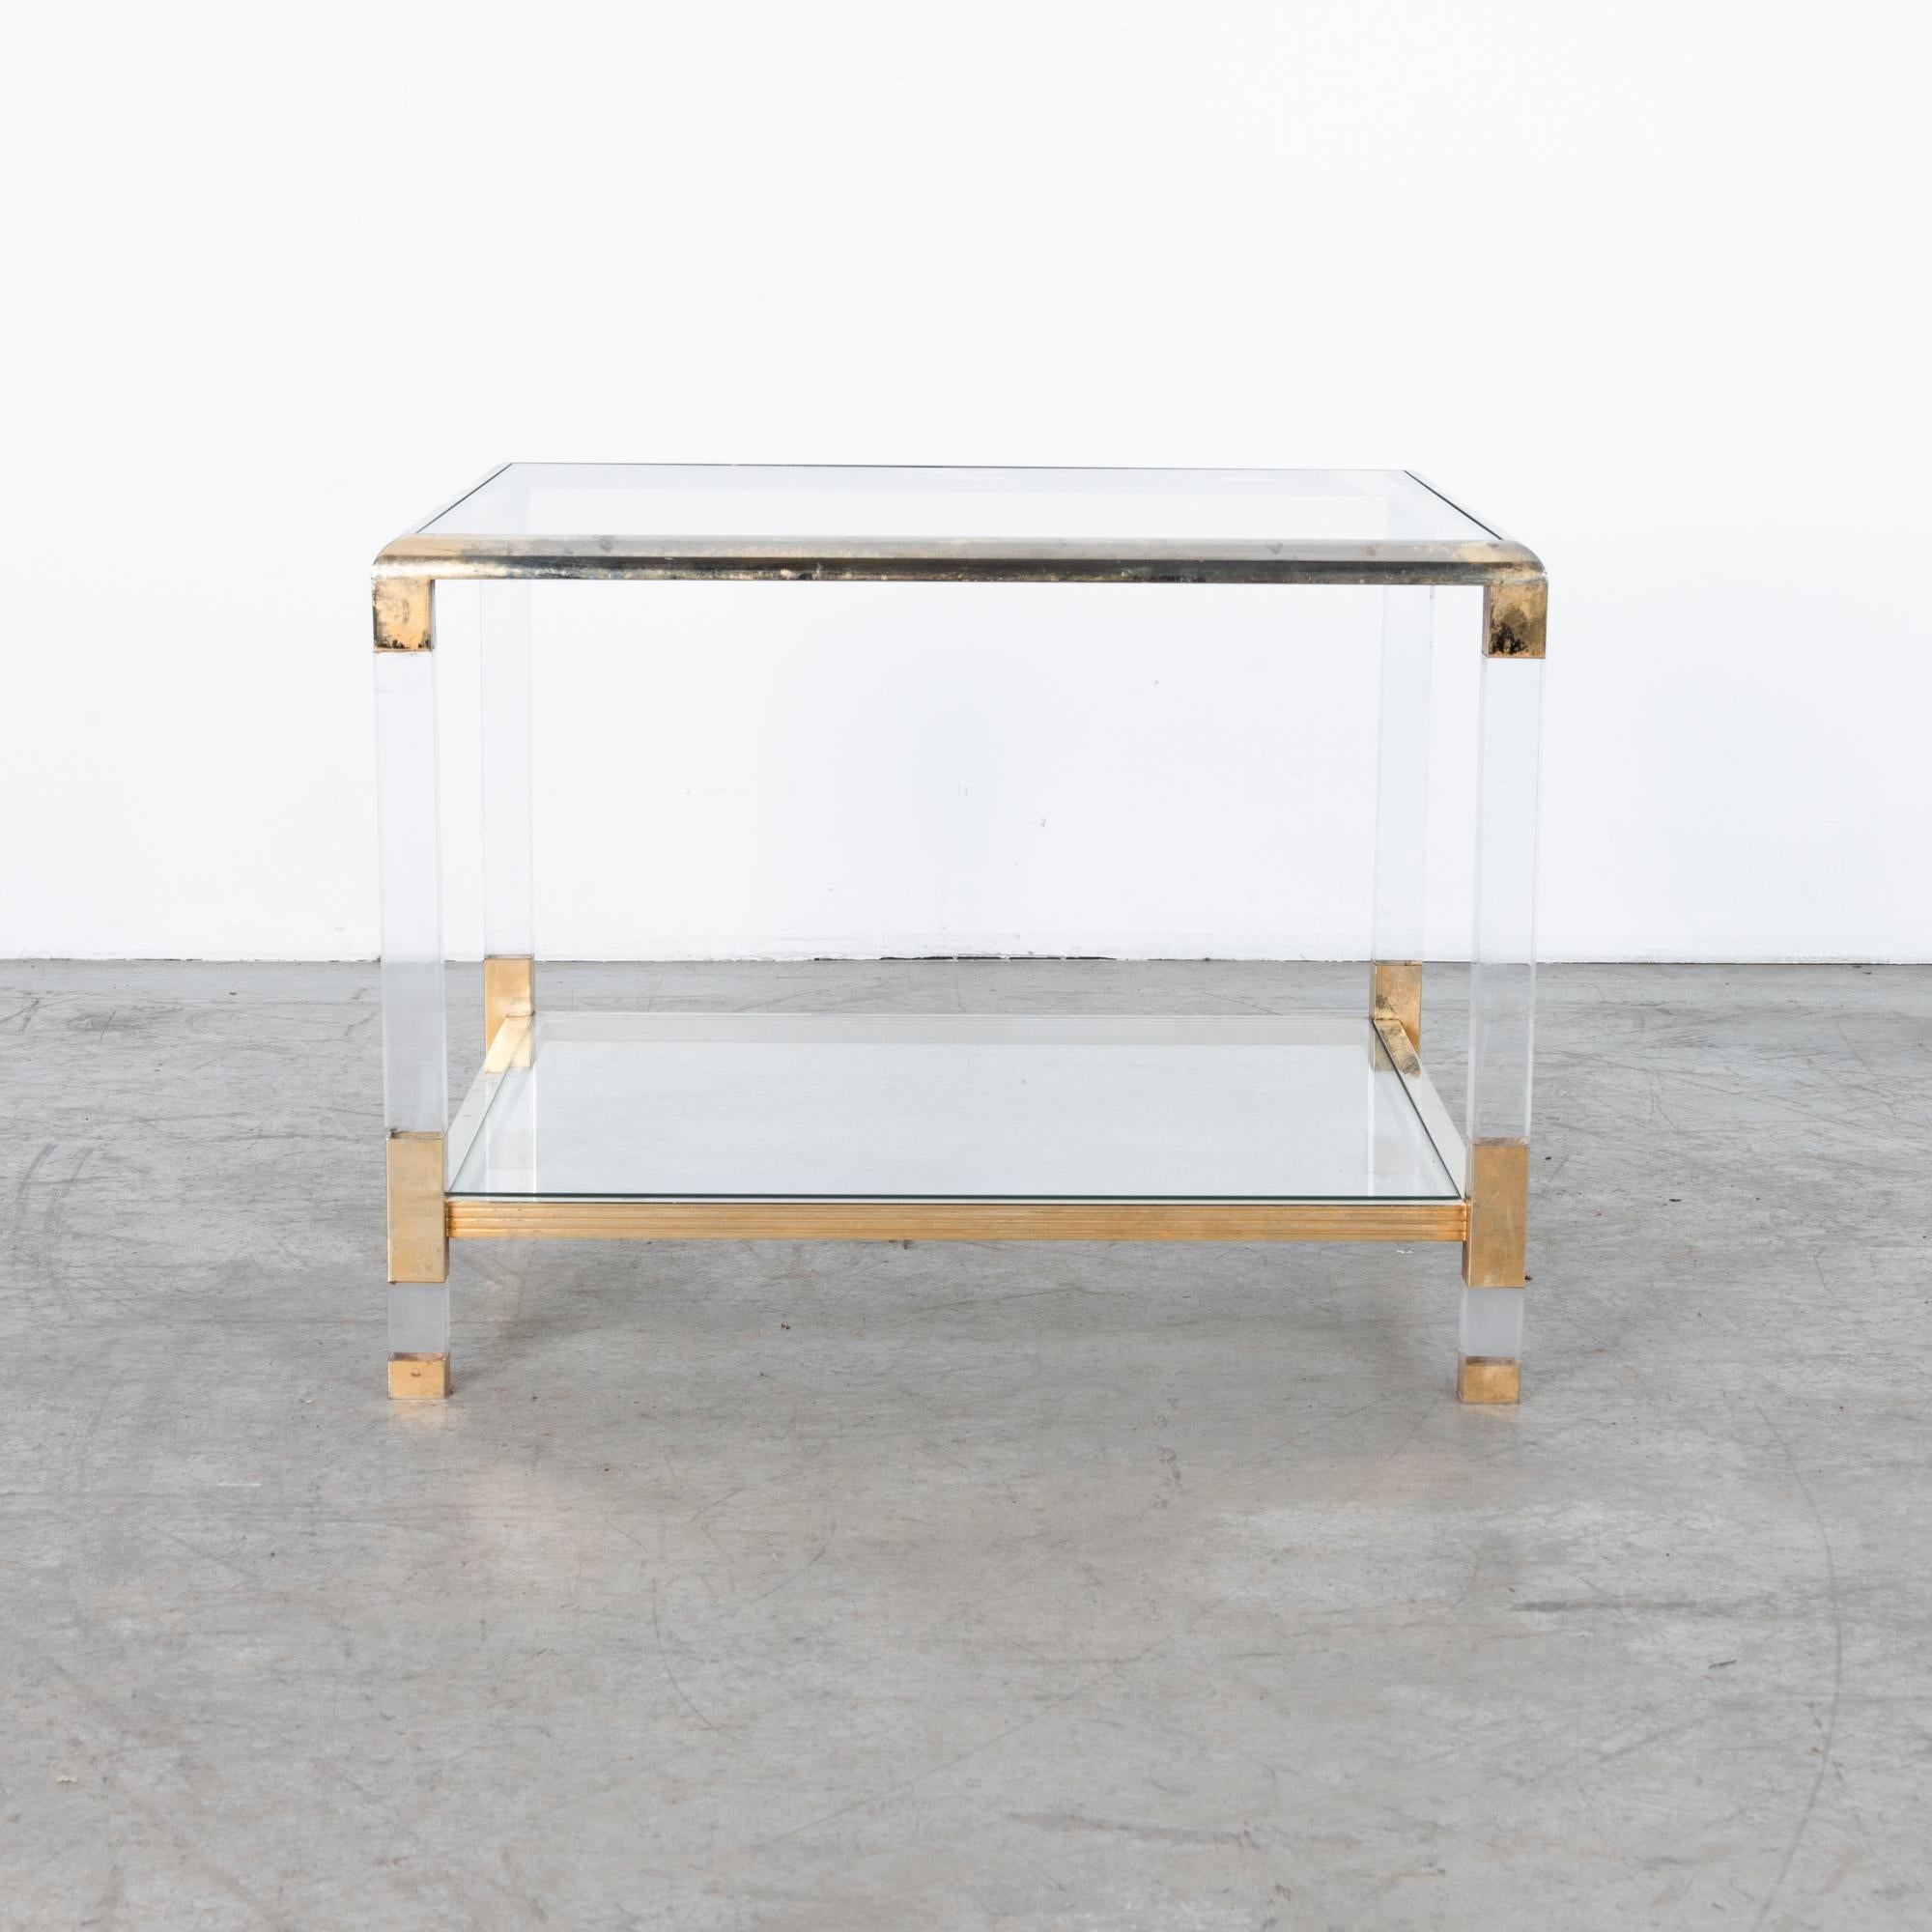 A classic and chic design from 1970s France. Combines resin casted transparent legs with brass-plated metal and glass table top and shelf for a sleek and clean finish. With a worn patina, this piece is clean while also recalling an elegance gone